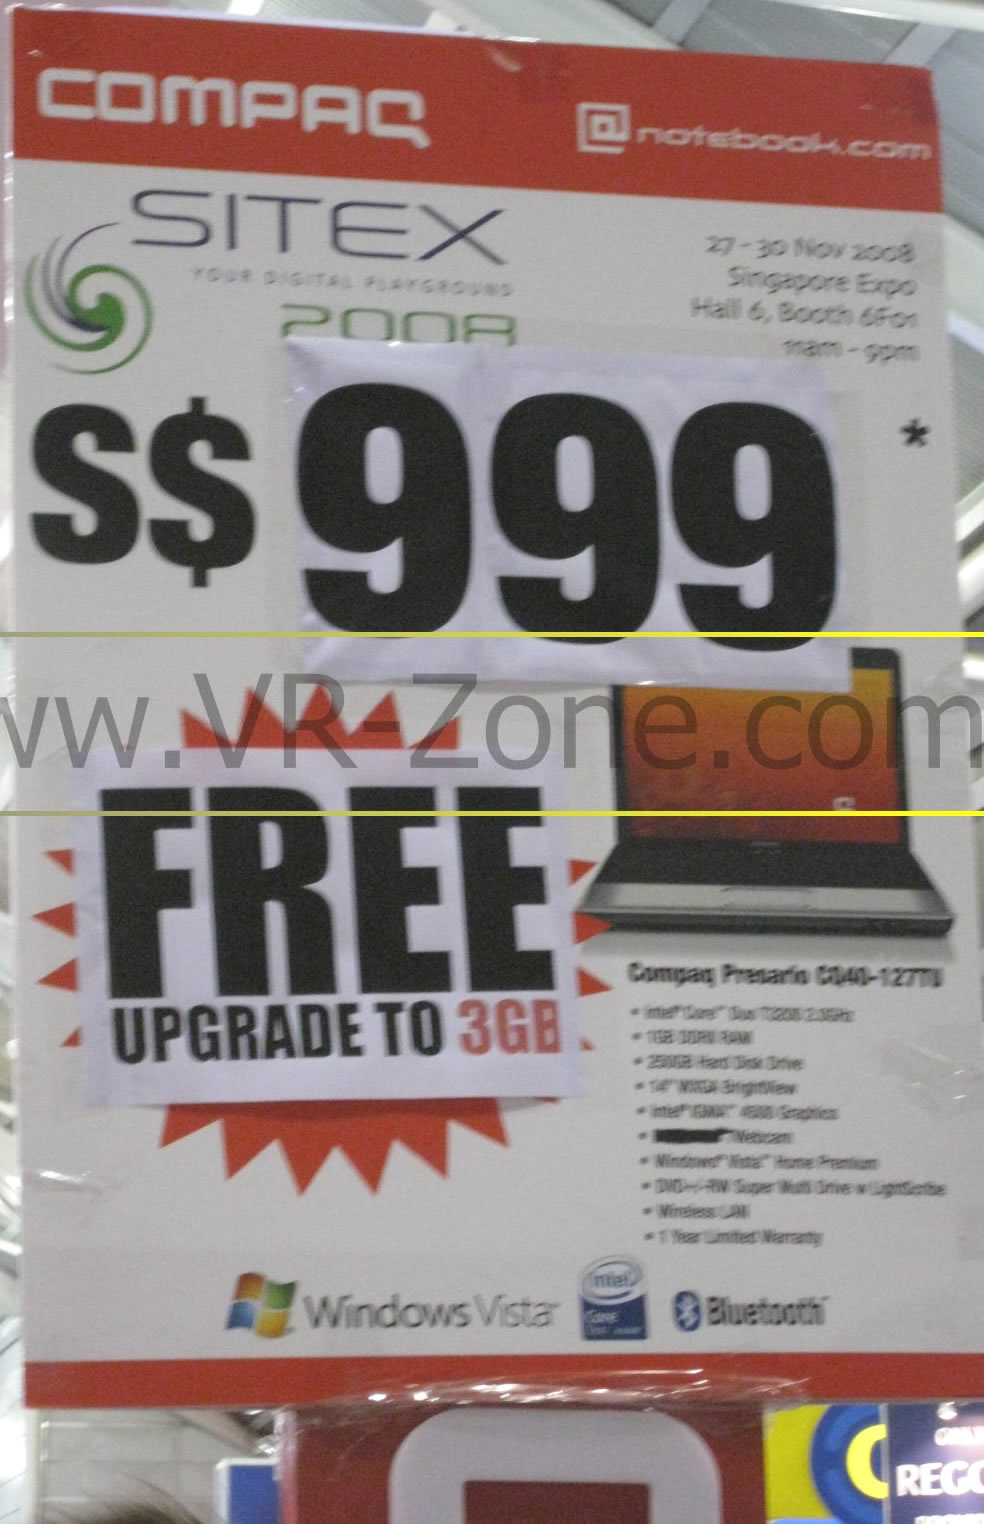 Sitex 2008 price list image brochure of (LAST DAY Deals) VR-Zone Compaq IMG 1679